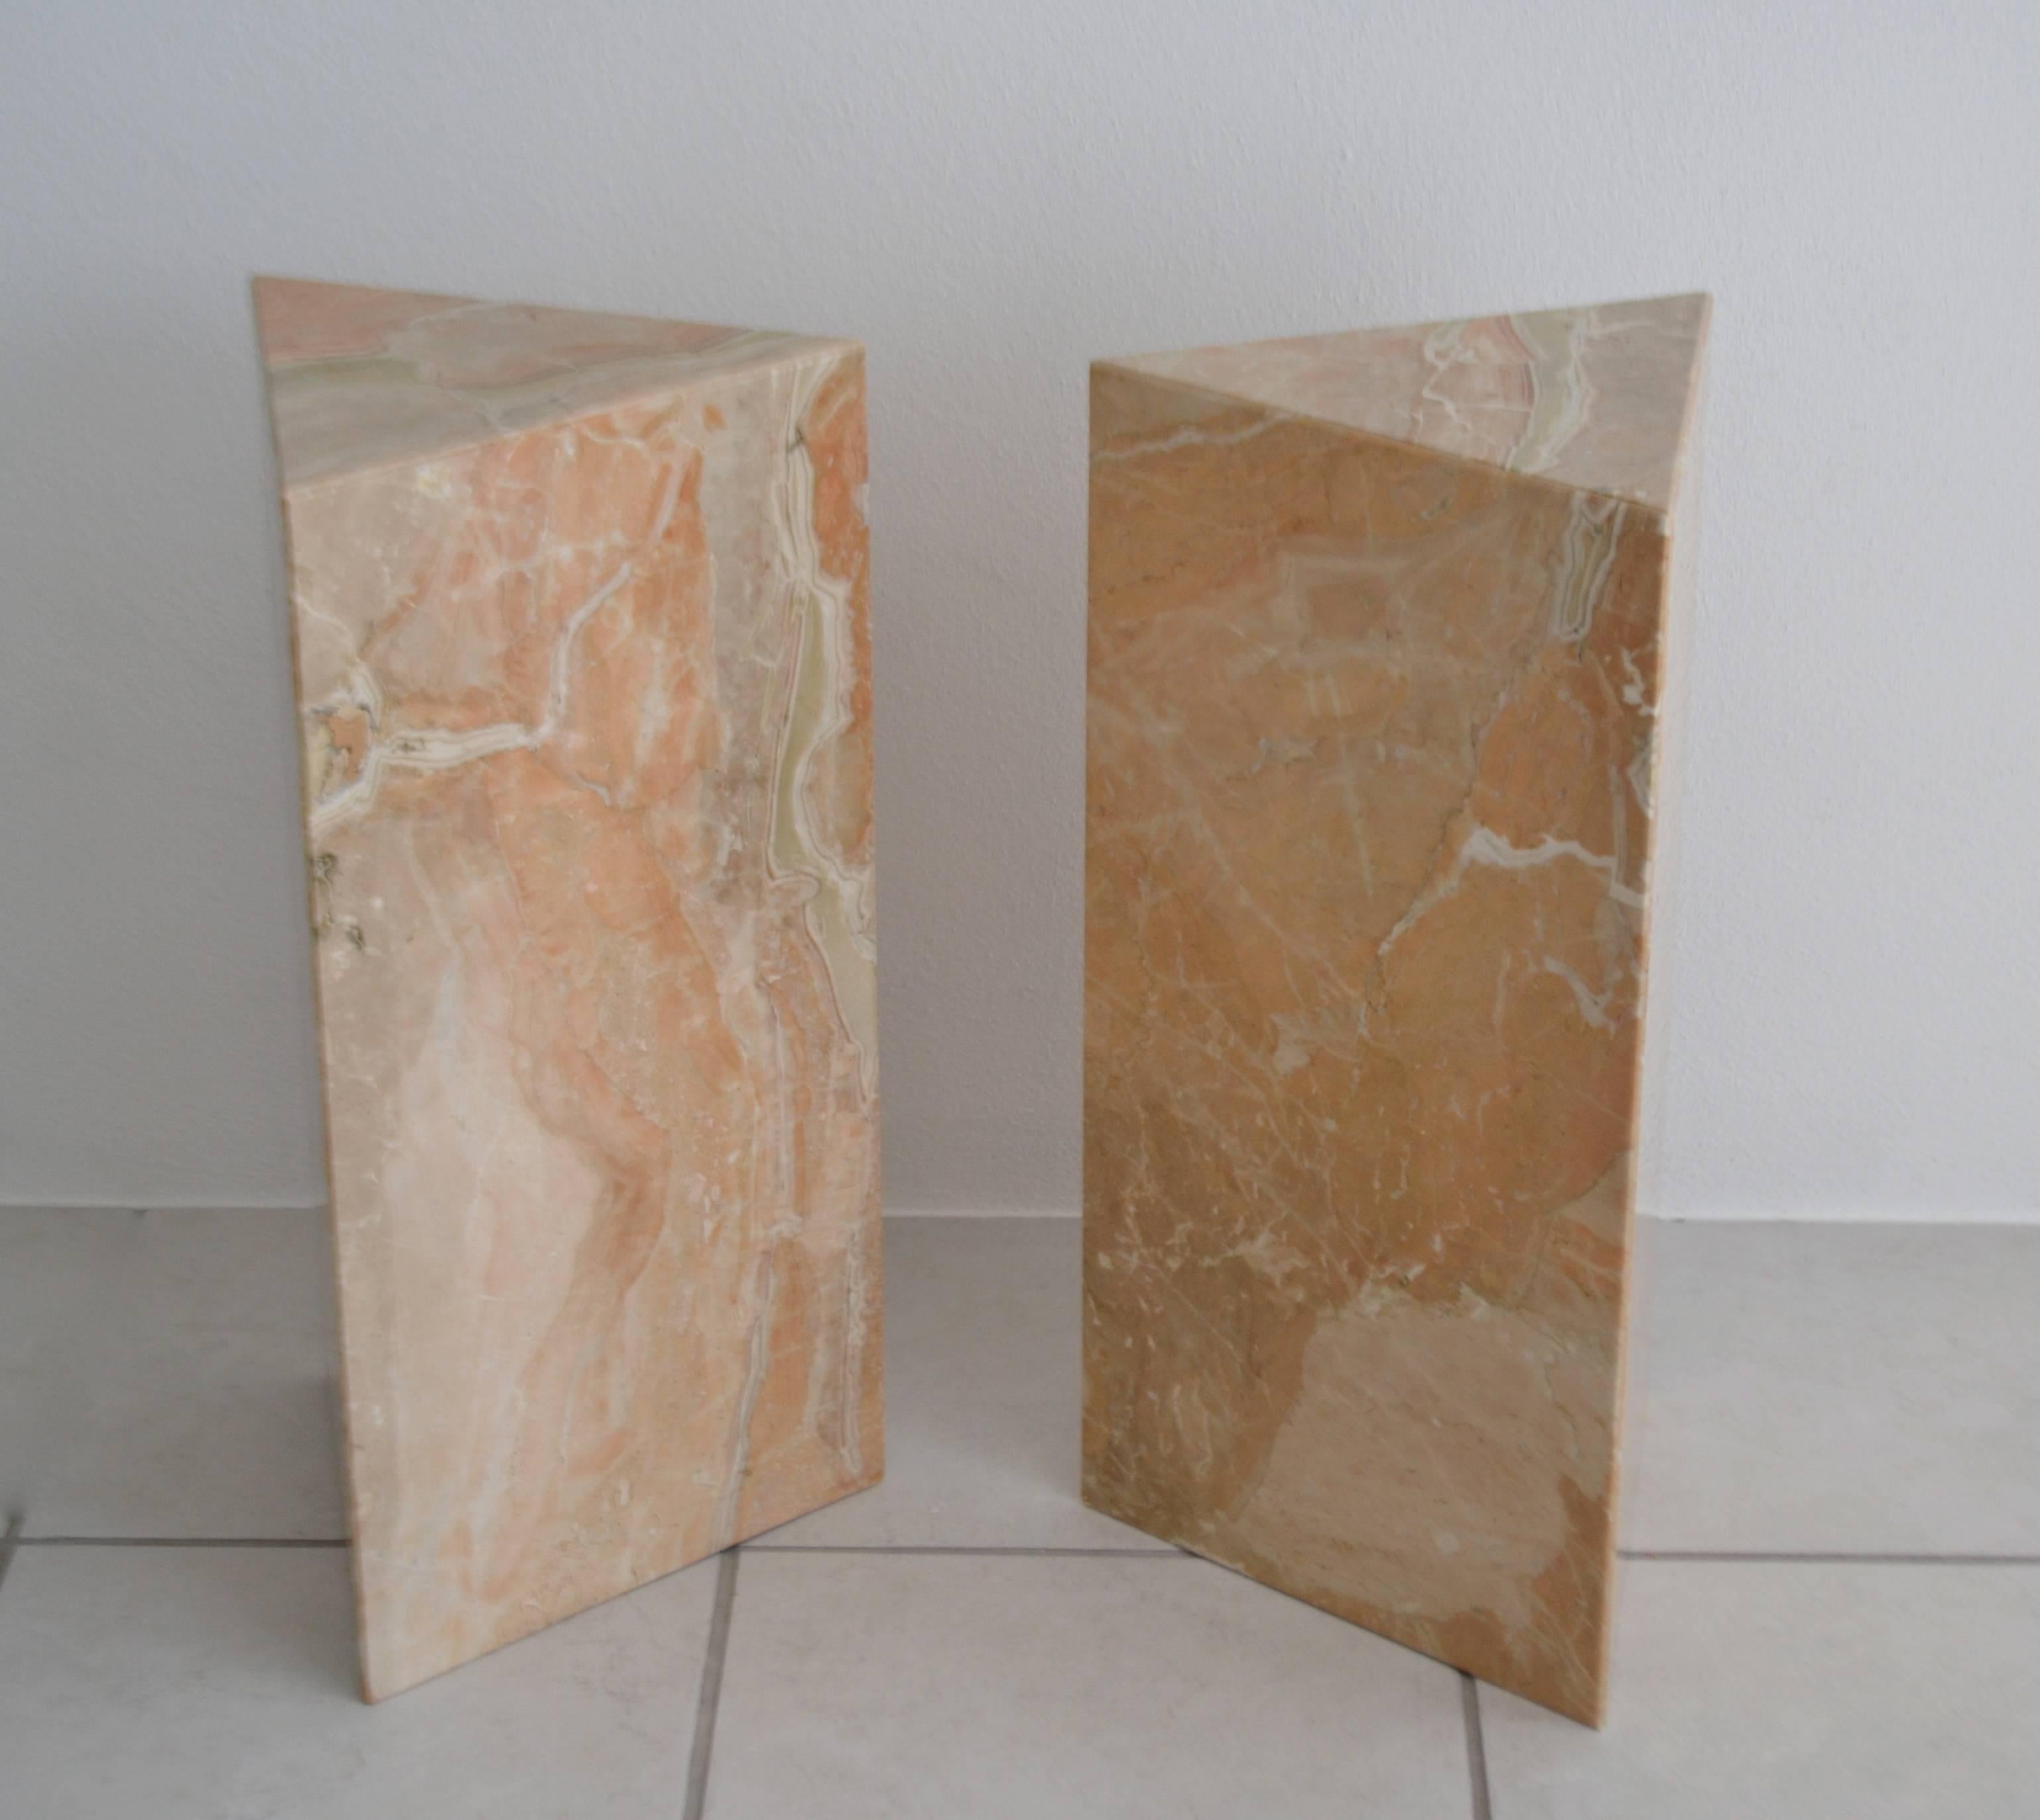 Pair of Postmodern Marble Triangular Form Pedestals In Good Condition For Sale In West Palm Beach, FL